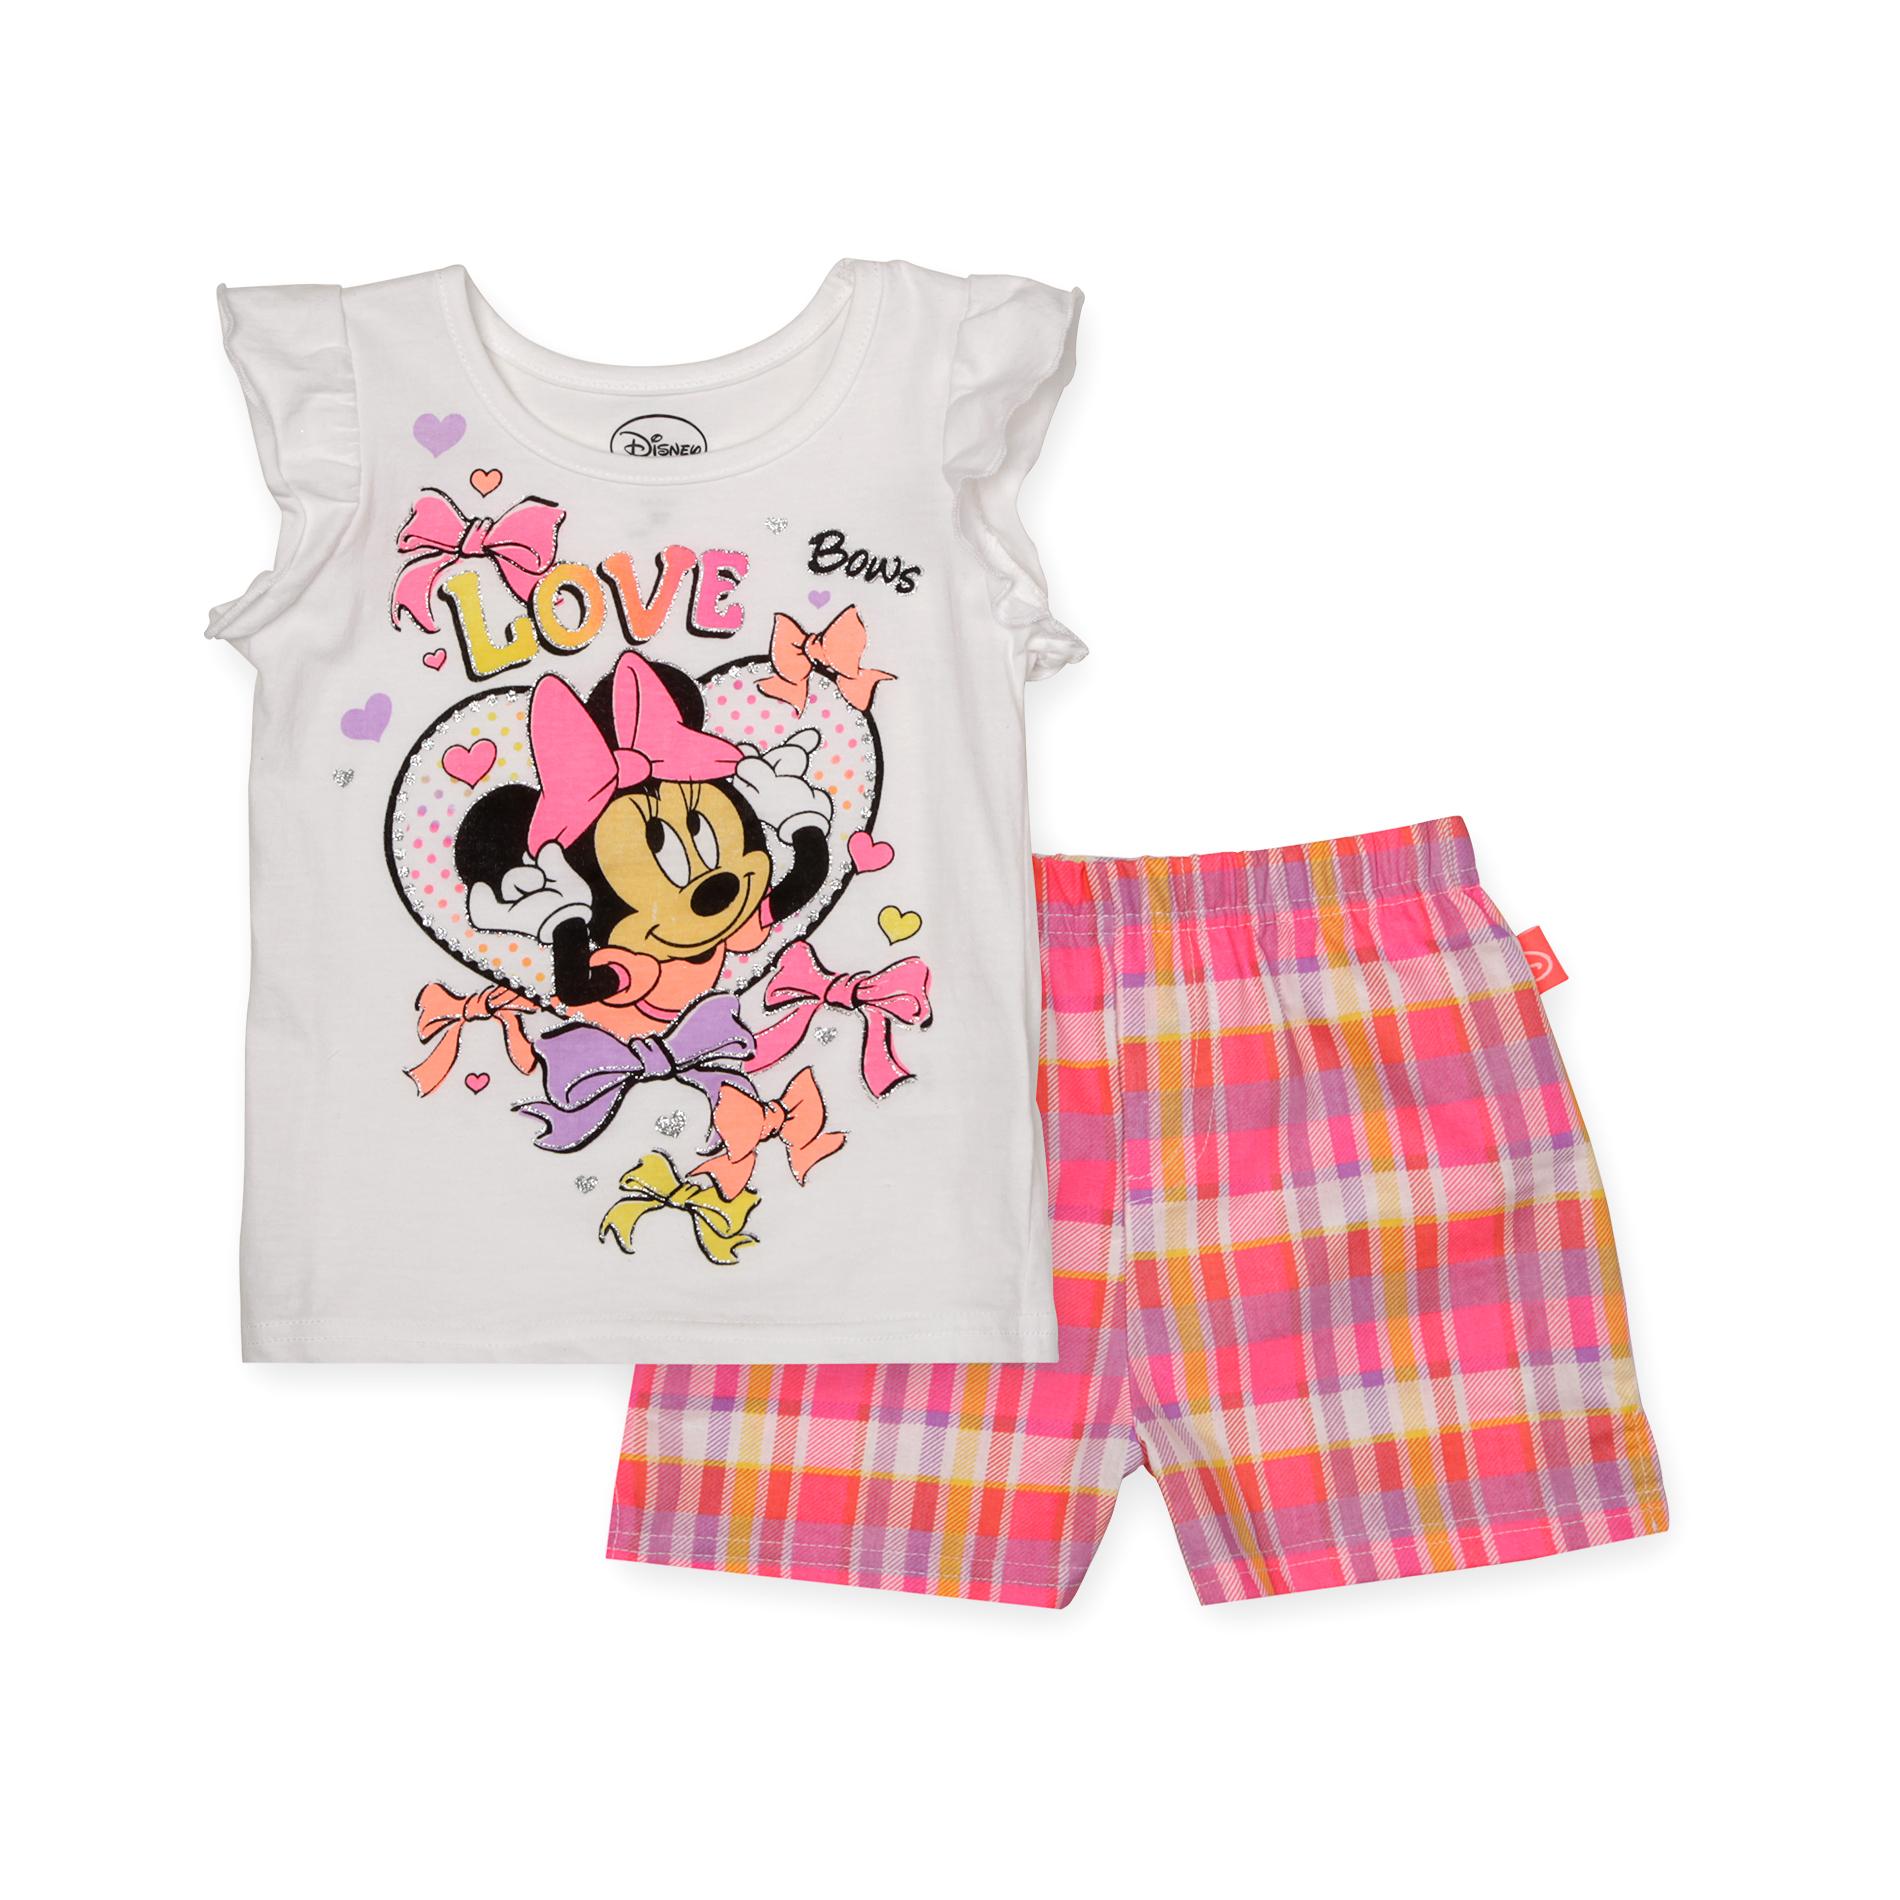 Disney Infant & Toddler Girl's Graphic T-Shirt & Shorts - Minnie Mouse